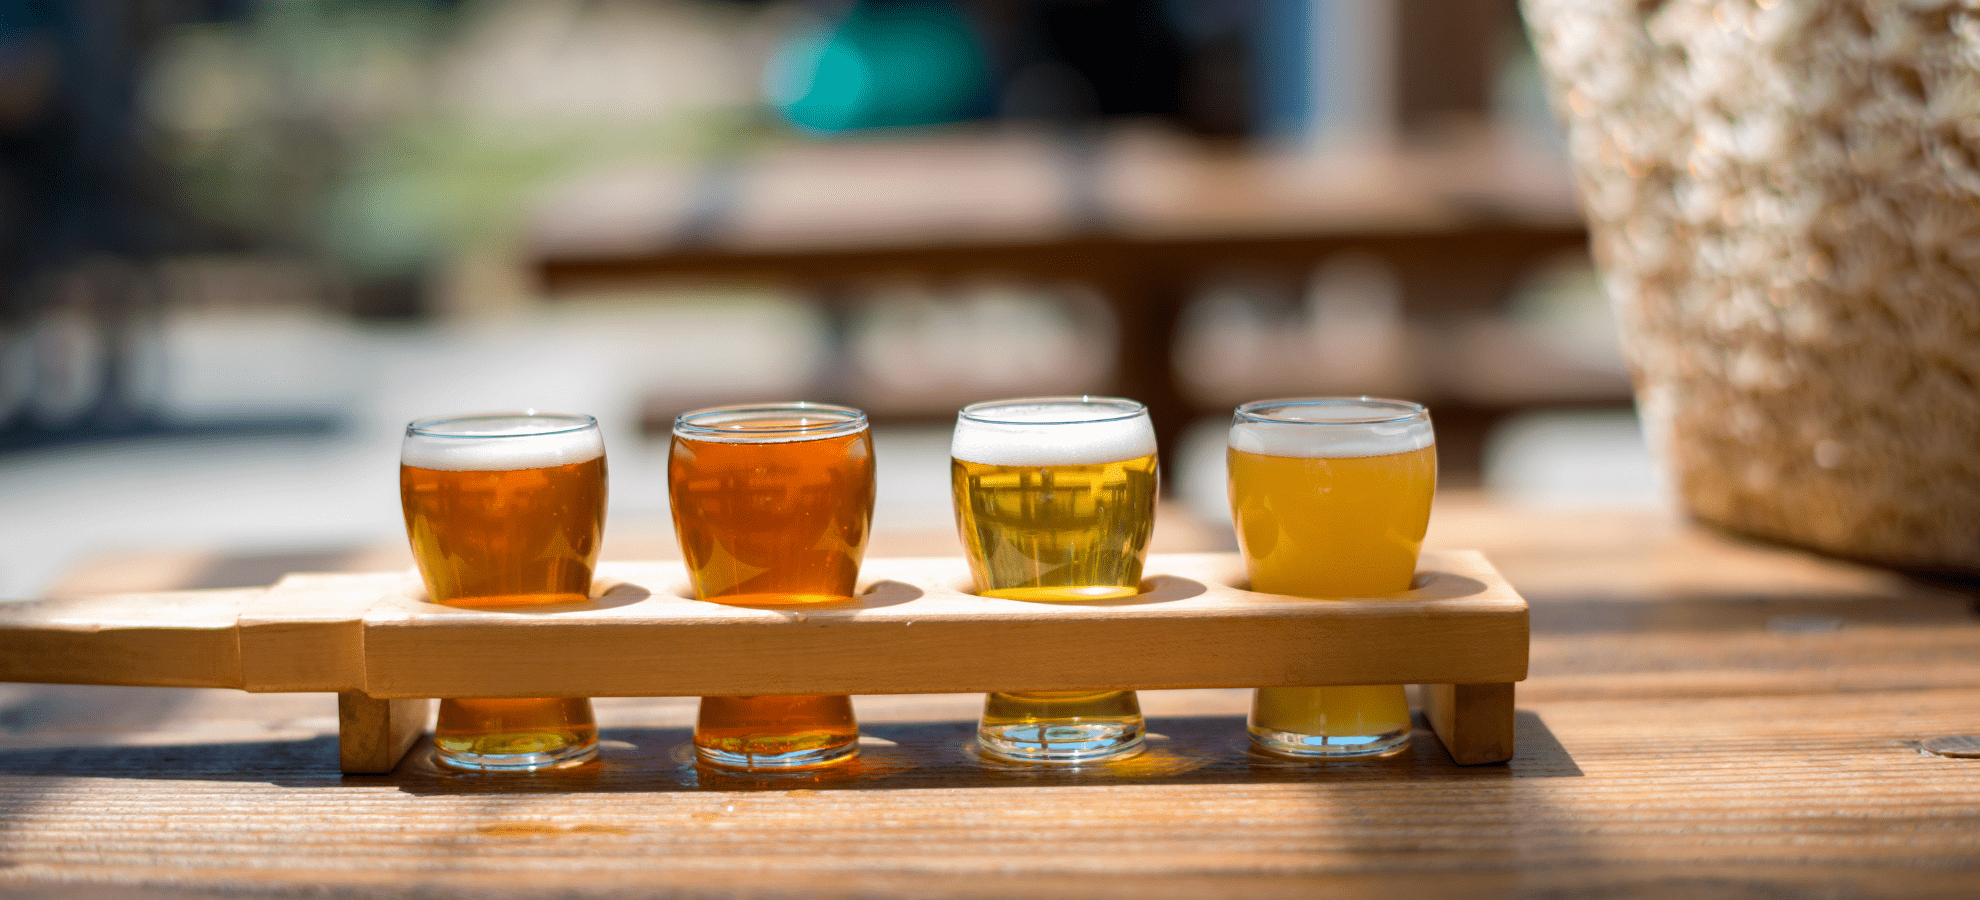 flight of different types of beer with a basket in the corner as decoration